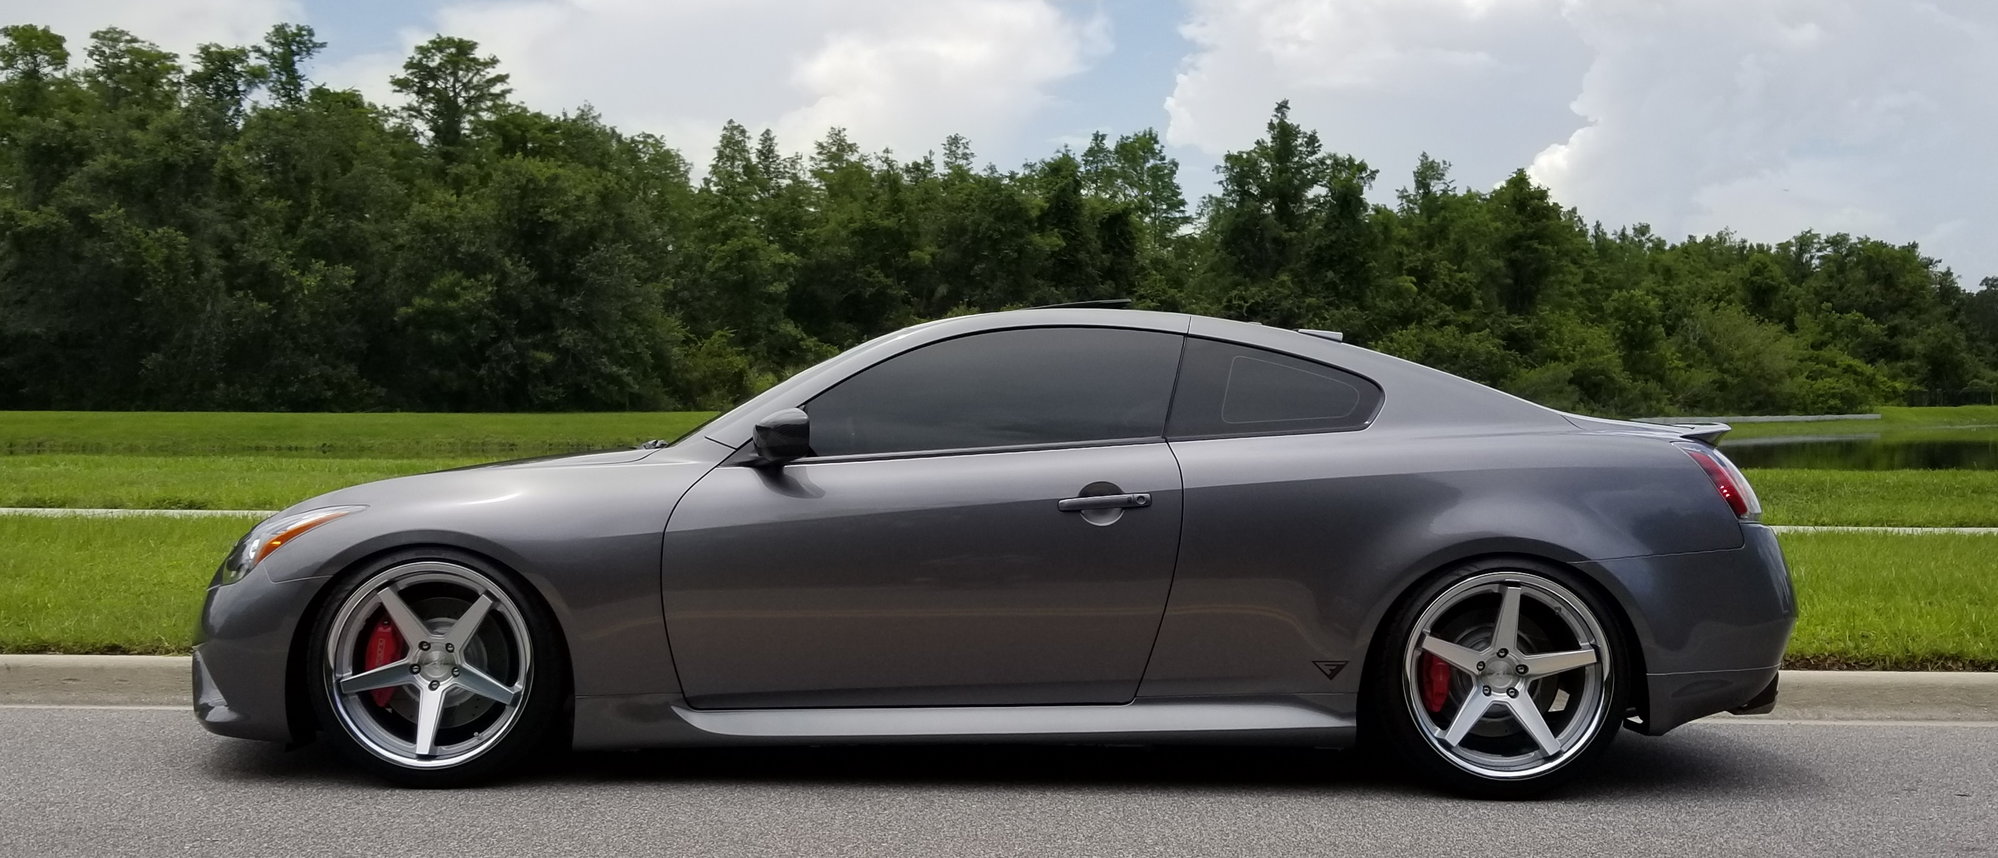 My new build, 2013 Infiniti G37s coupe - Page 7 - MyG37